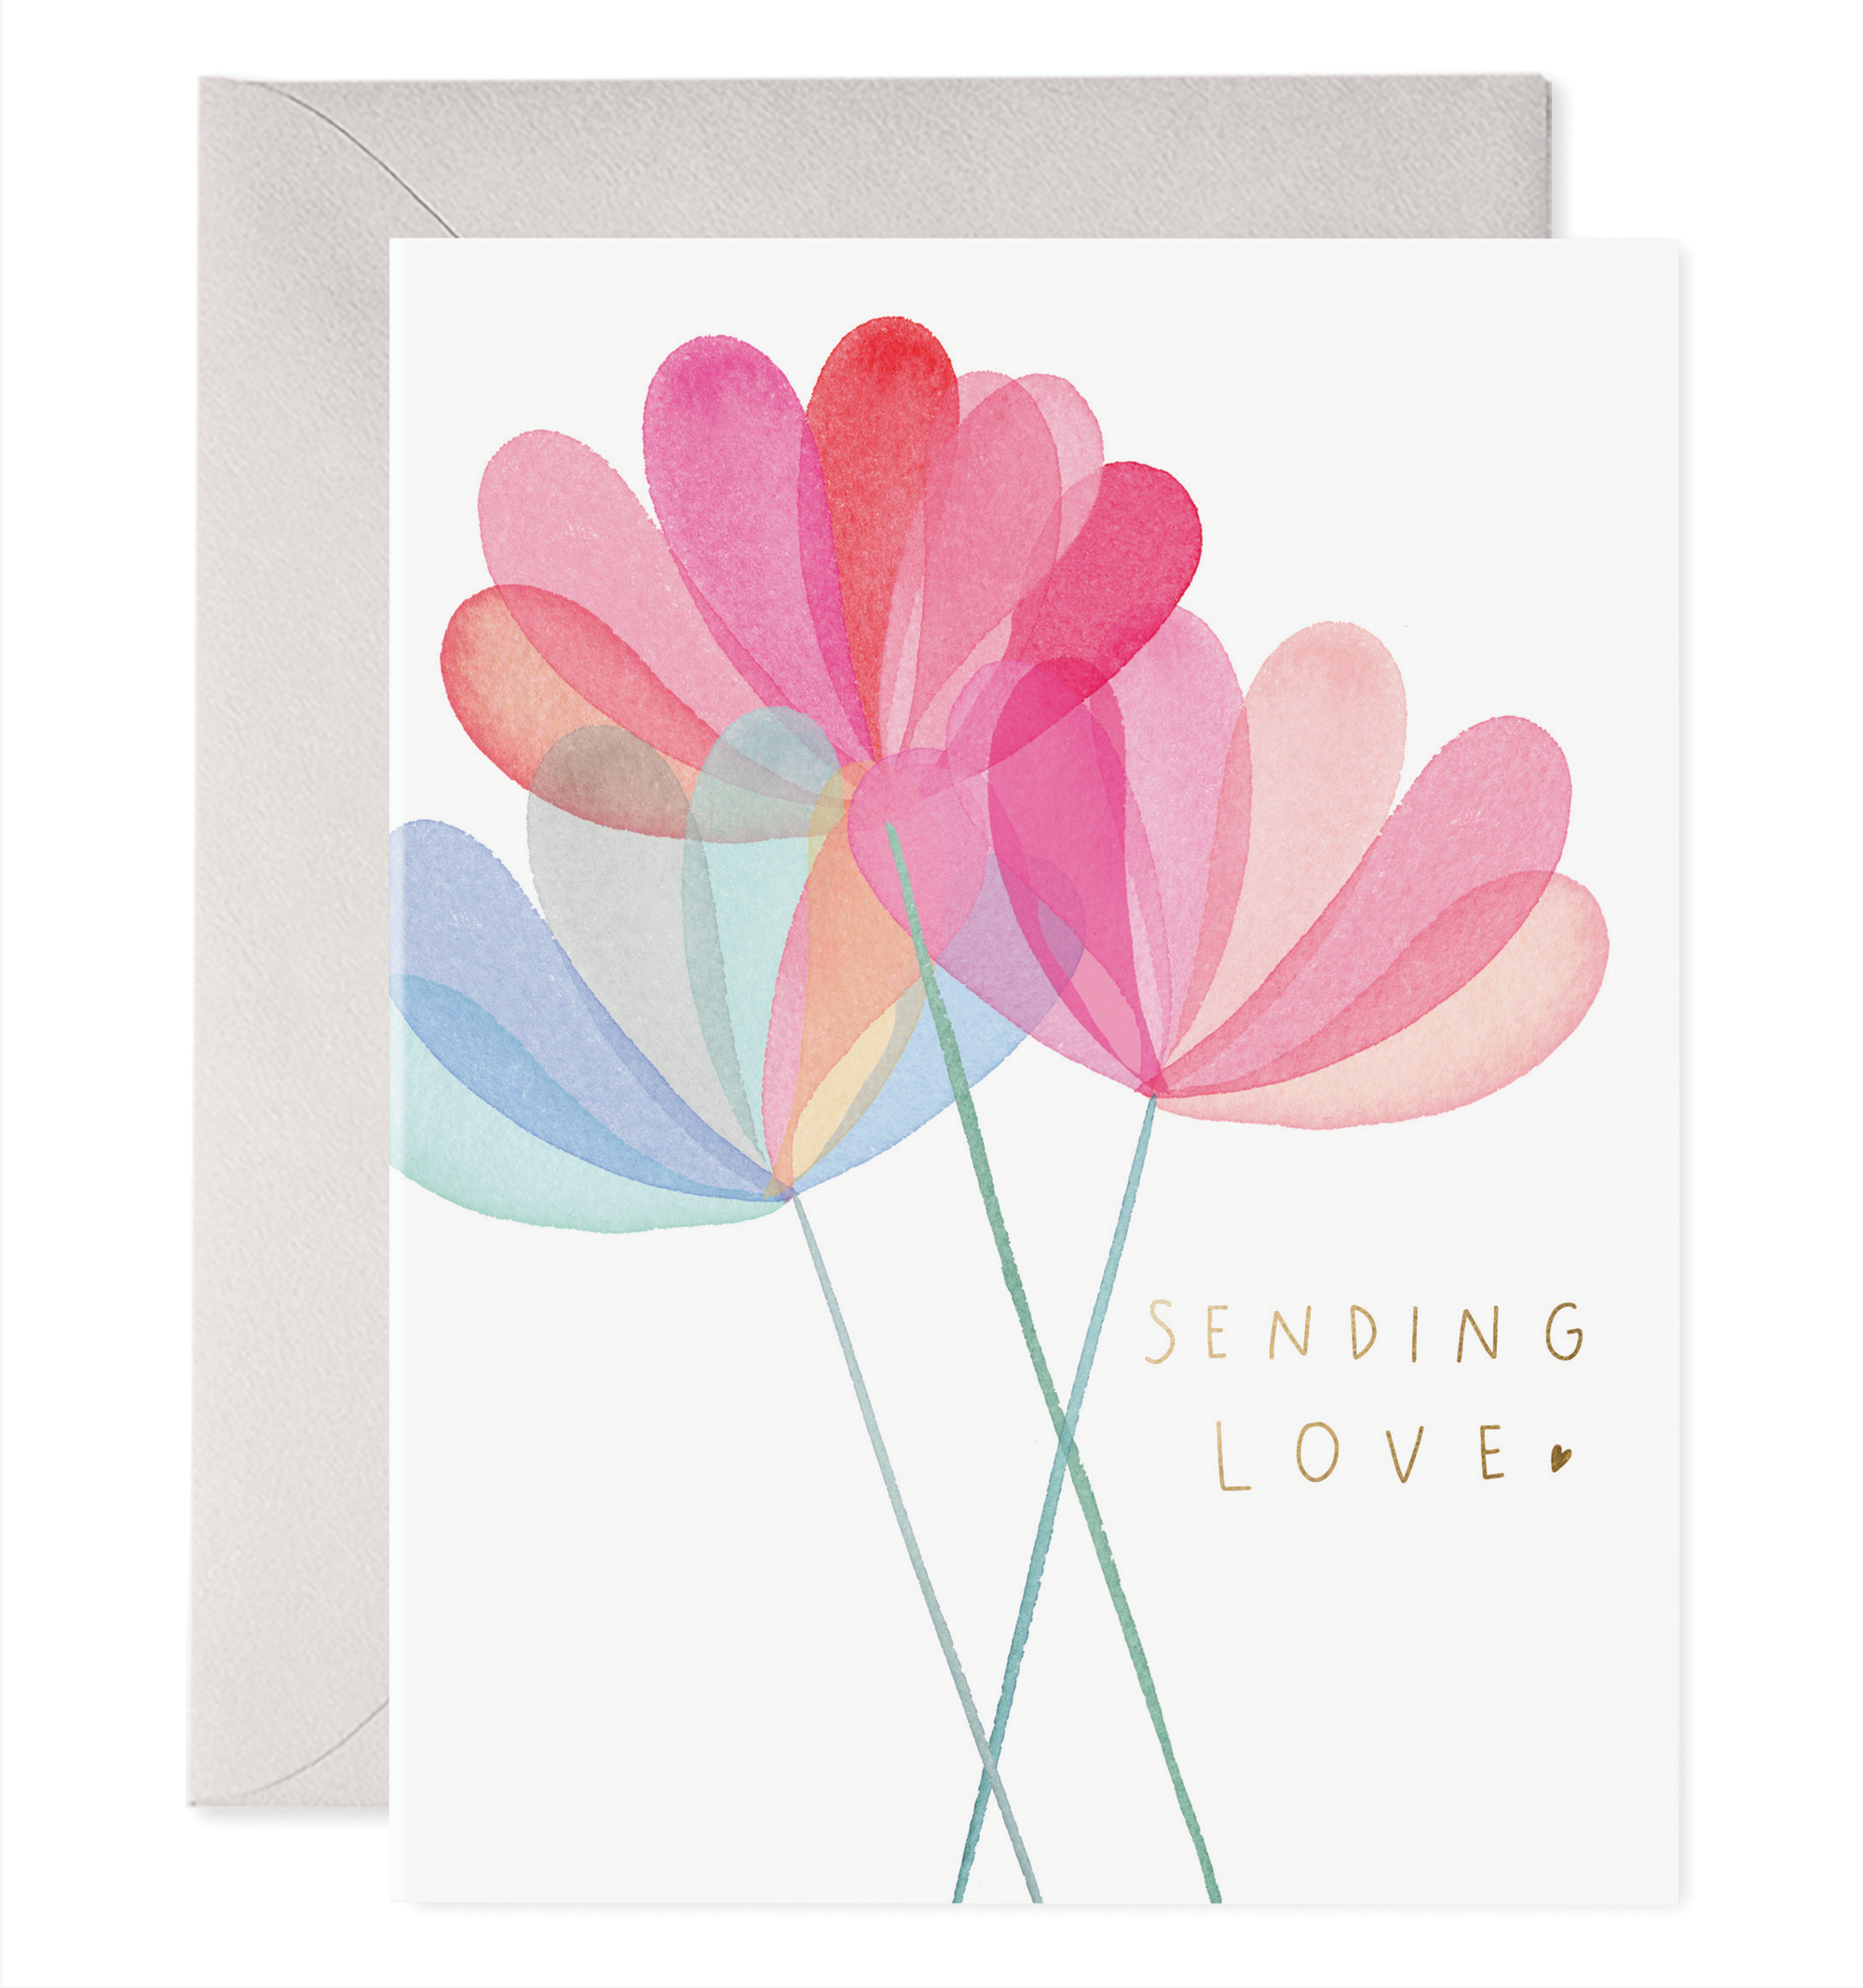 Sending Love | Thinking of You Greeting Card: 4.25 X 5.5 INCHES